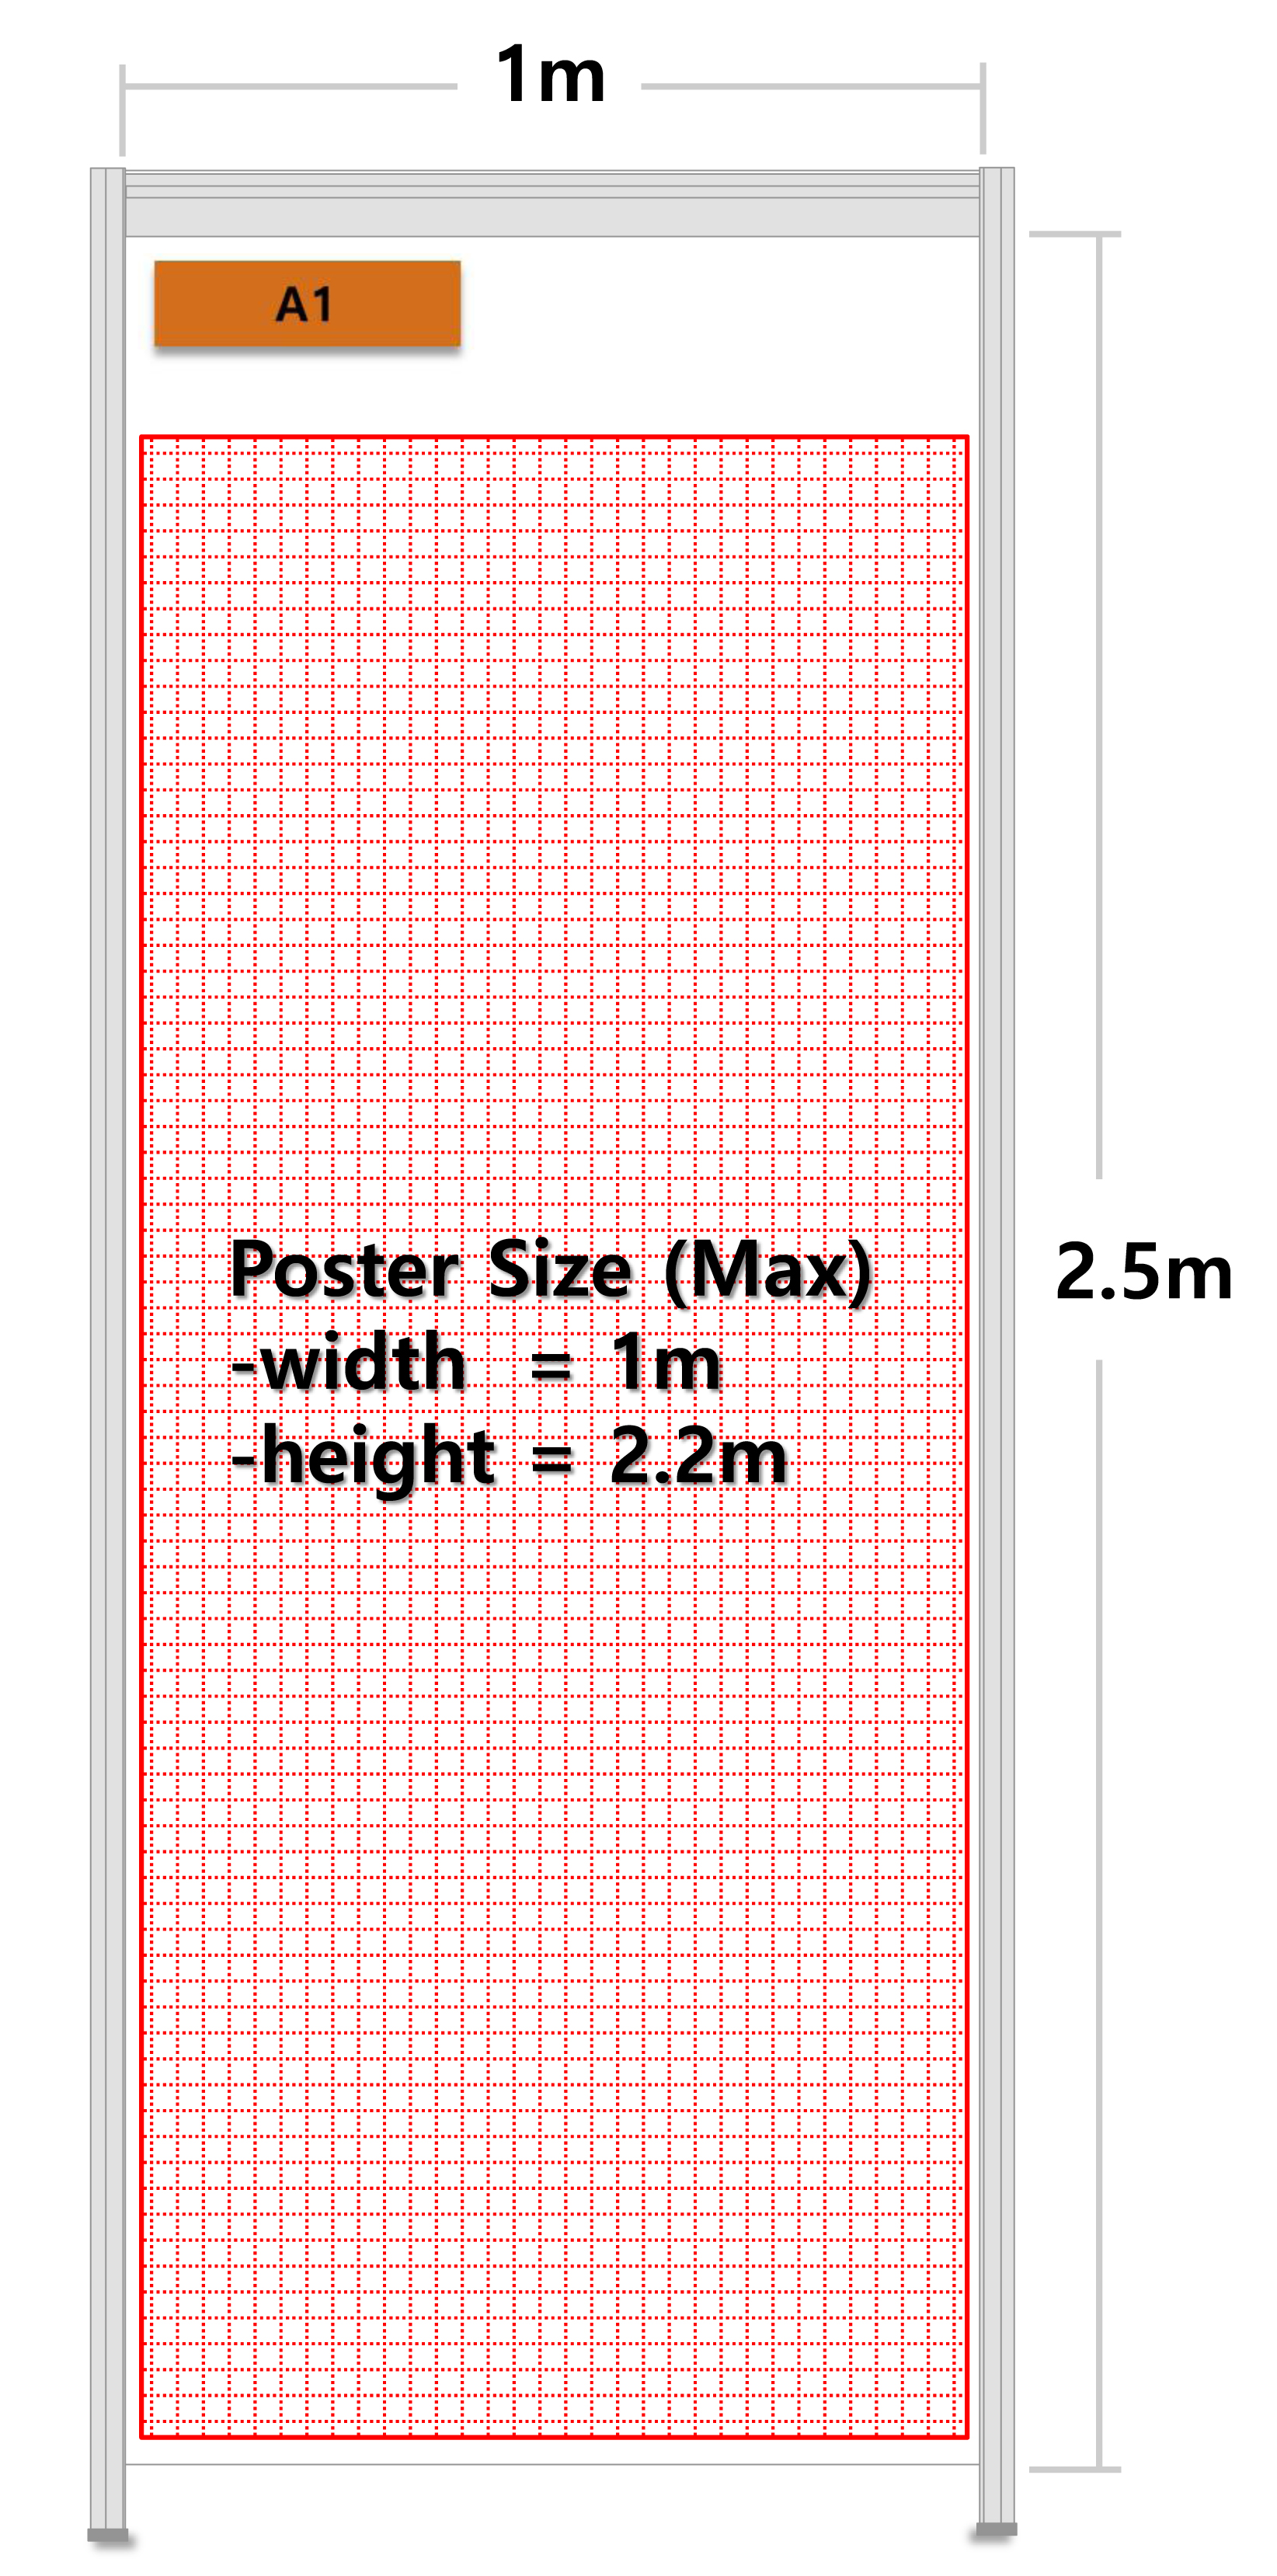 Guidelines for attaching a poster